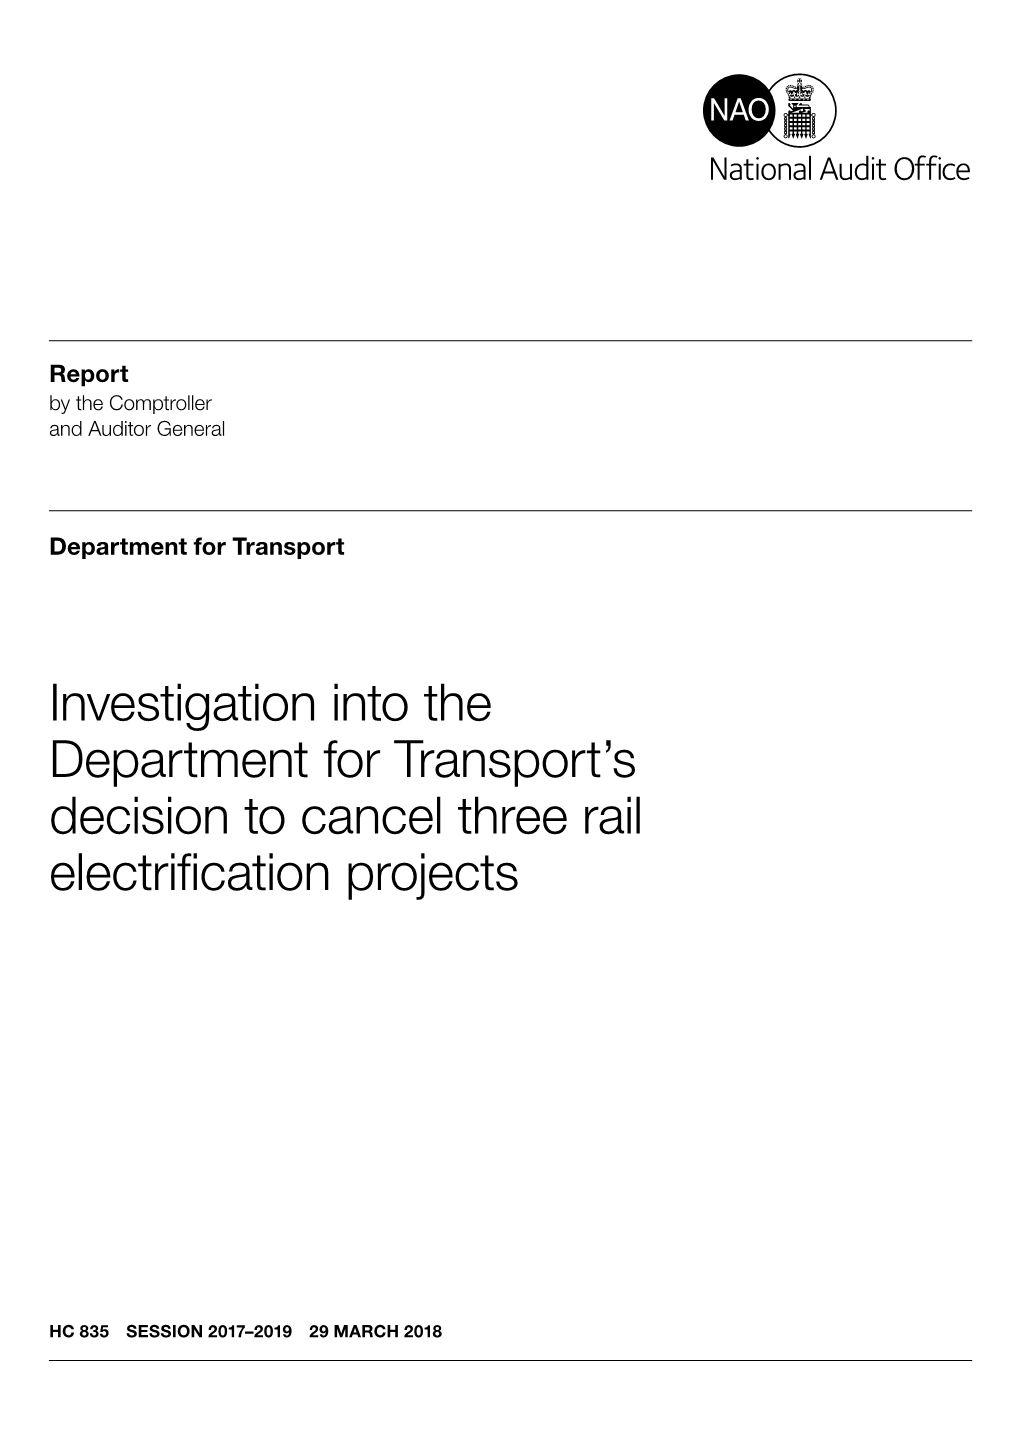 Investigation Into the Department for Transport's Decision to Cancel Three